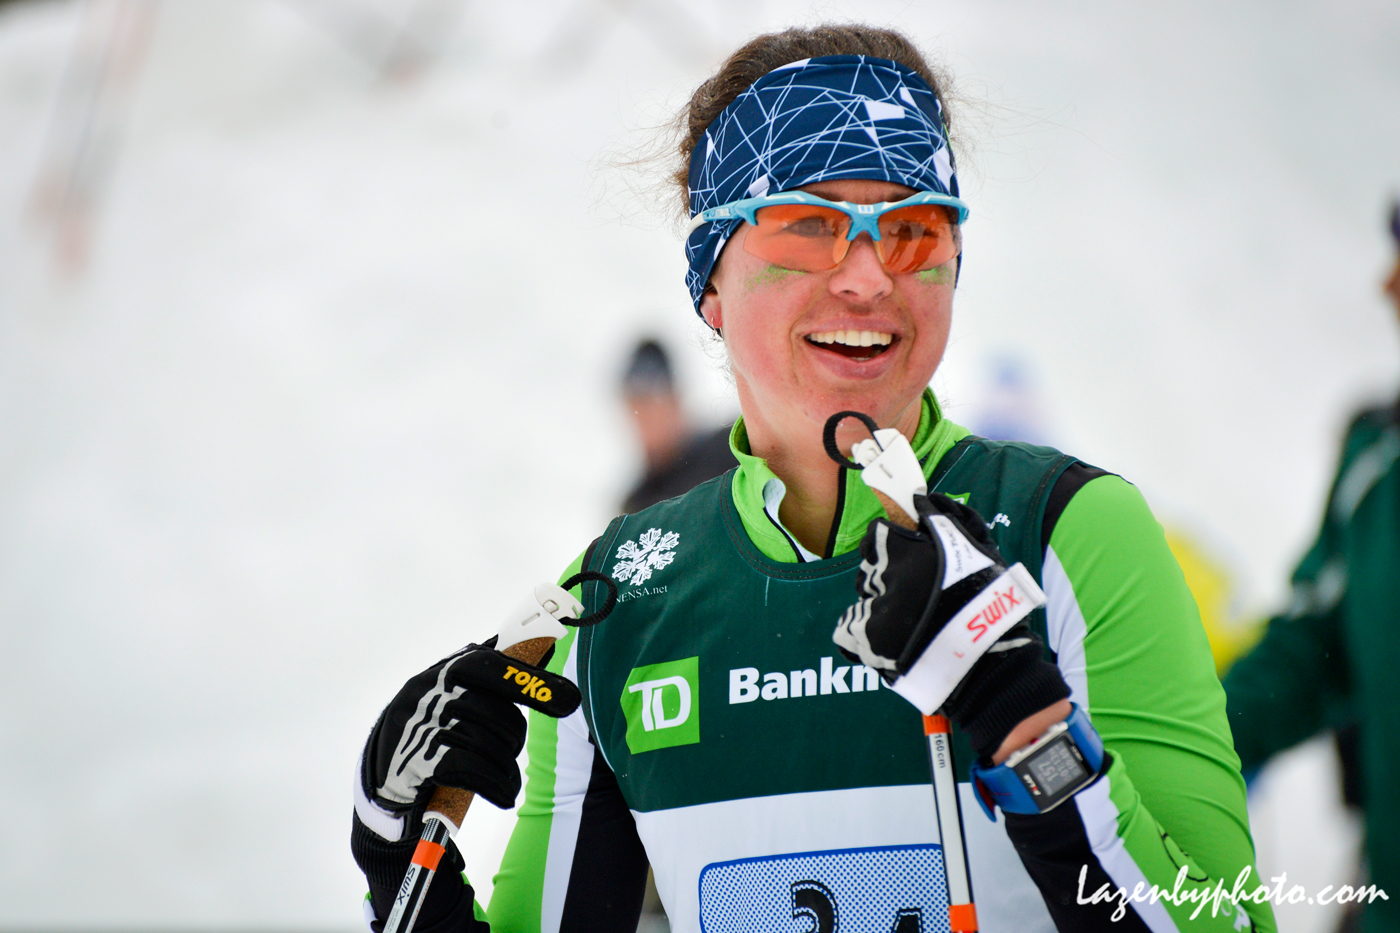 Craftsbury's Caitlin Patterson before anchoring "Vailbury Green" to second in the mixed relay at 2016 SuperTour Finals in Craftsbury, Vt.(Photo: John Lazenby/Lazenbyphoto.com)